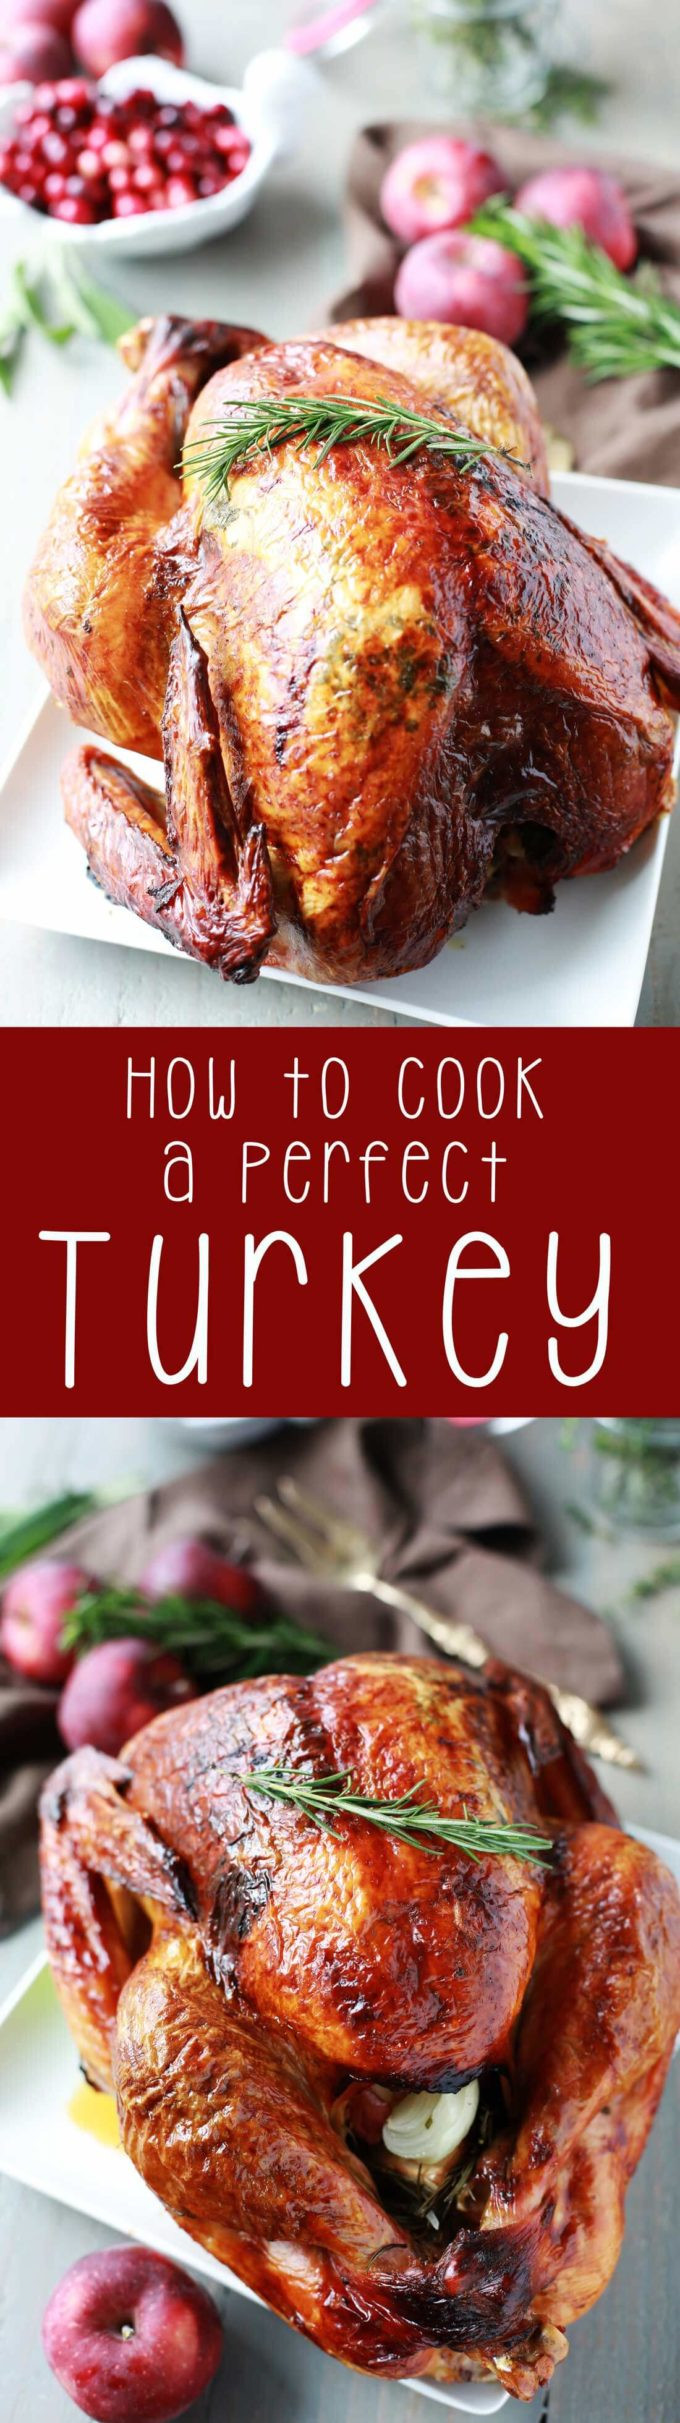 How To Cook A Thanksgiving Turkey
 How to Cook a Perfect Turkey Eazy Peazy Mealz